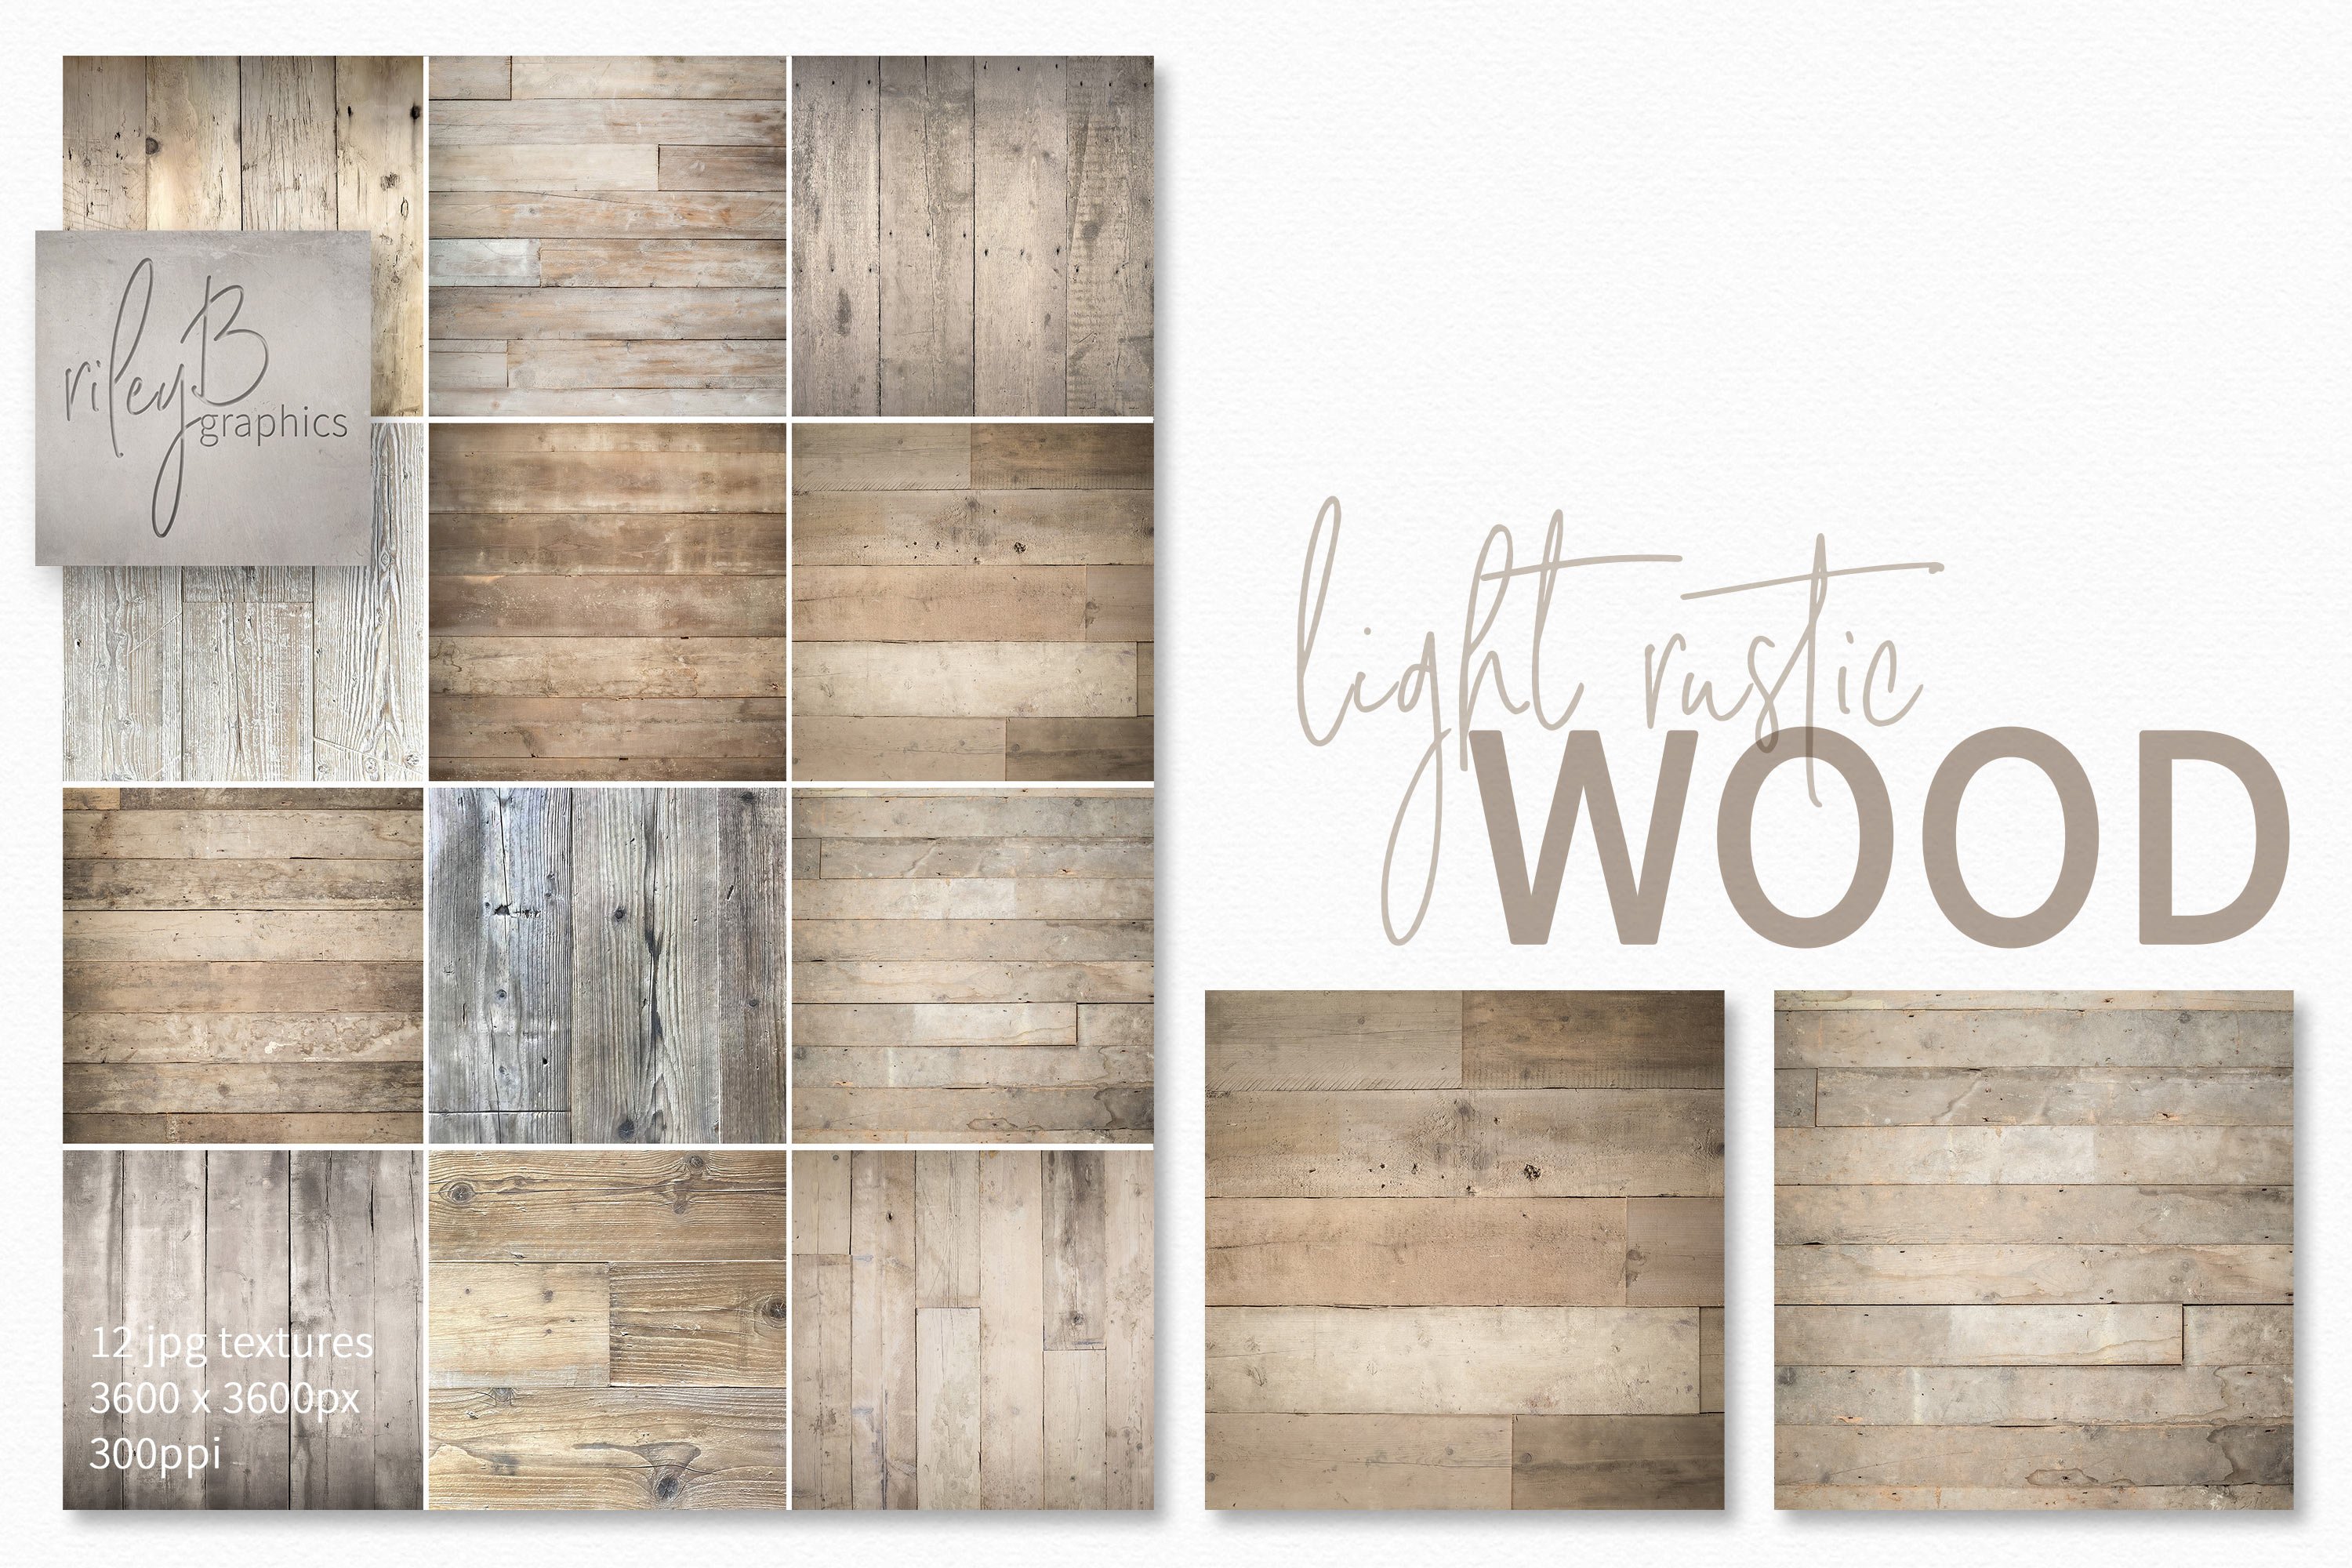 Light Rustic Wood Textures cover image.